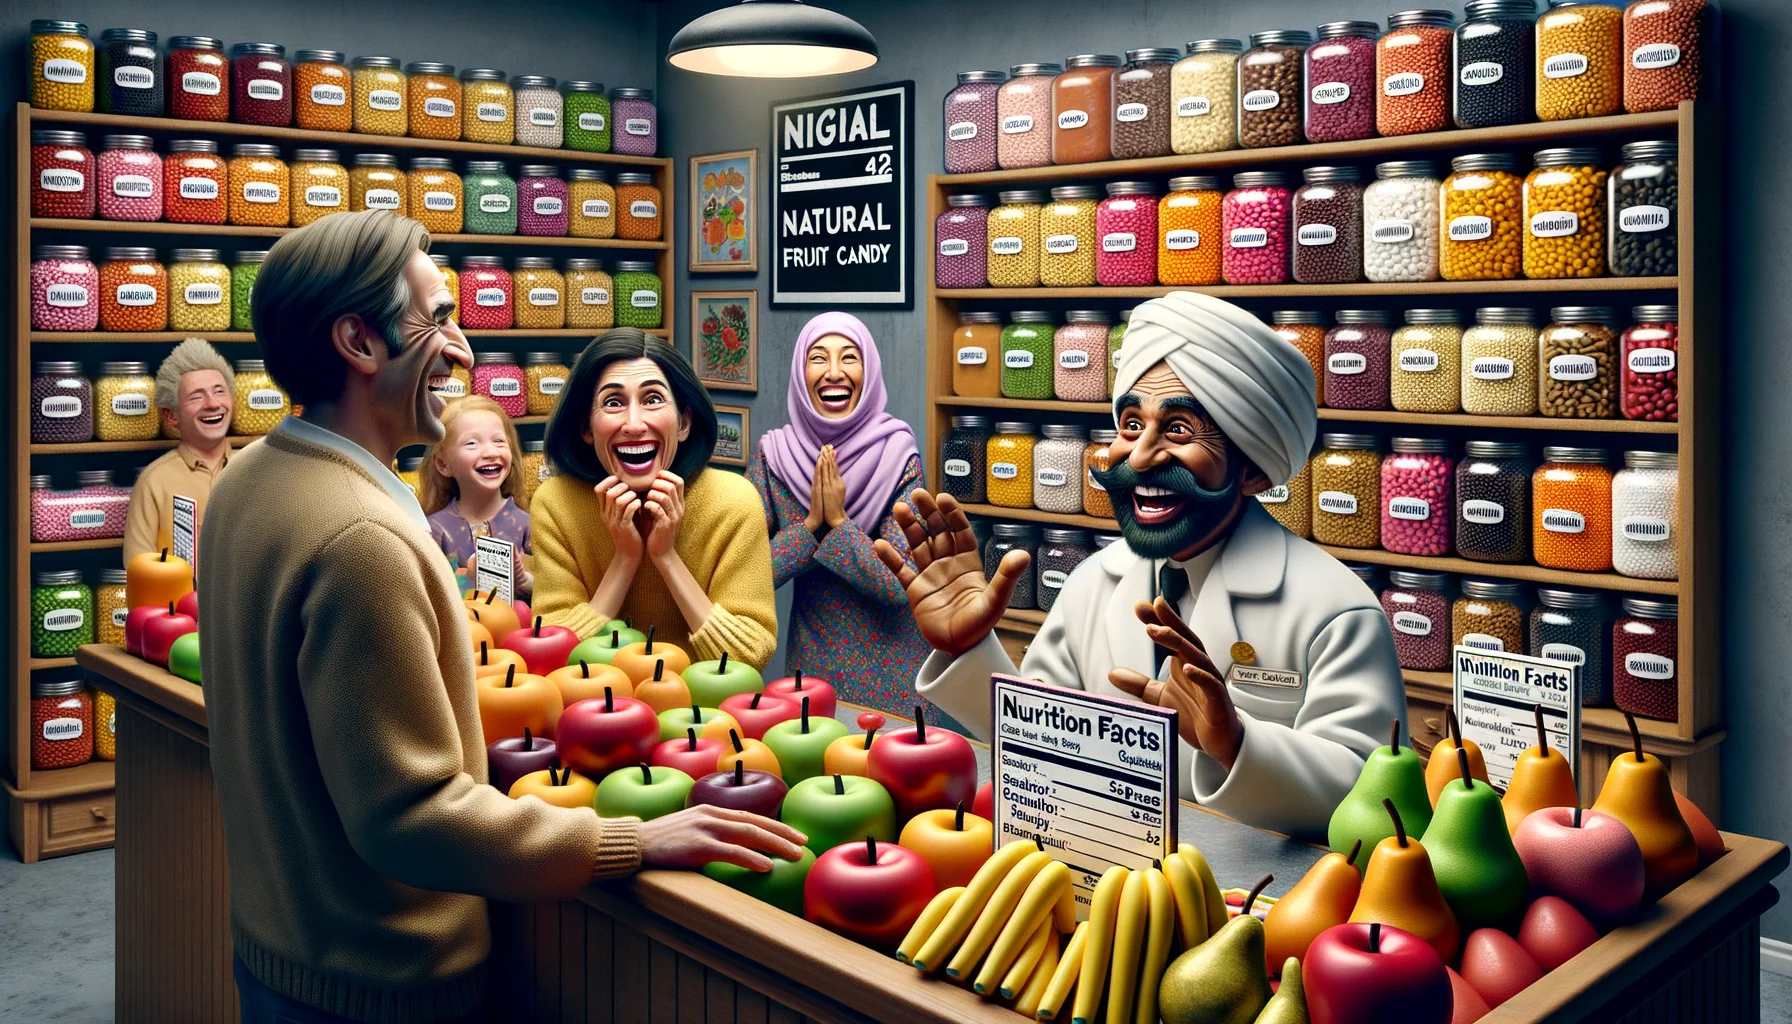 Imagine a humorous and lifelike scene set in a candy store. The shop is filled with various types of natural fruit candies. The shelves are adorned with an array of vibrantly colored, fruit-shaped candies, mimicking a fruit market. A few customers, a Caucasian man and a Middle-Eastern woman, are filled with childlike joy as they marvel at the array of choices. A South Asian shopkeeper, with a twinkling smile, stands behind the counter, offering samples of their best-sellers. Playful details, like a candy apple reading a nutrition facts label or a pear tumbling from a shelf add to the comedic element of the scene.